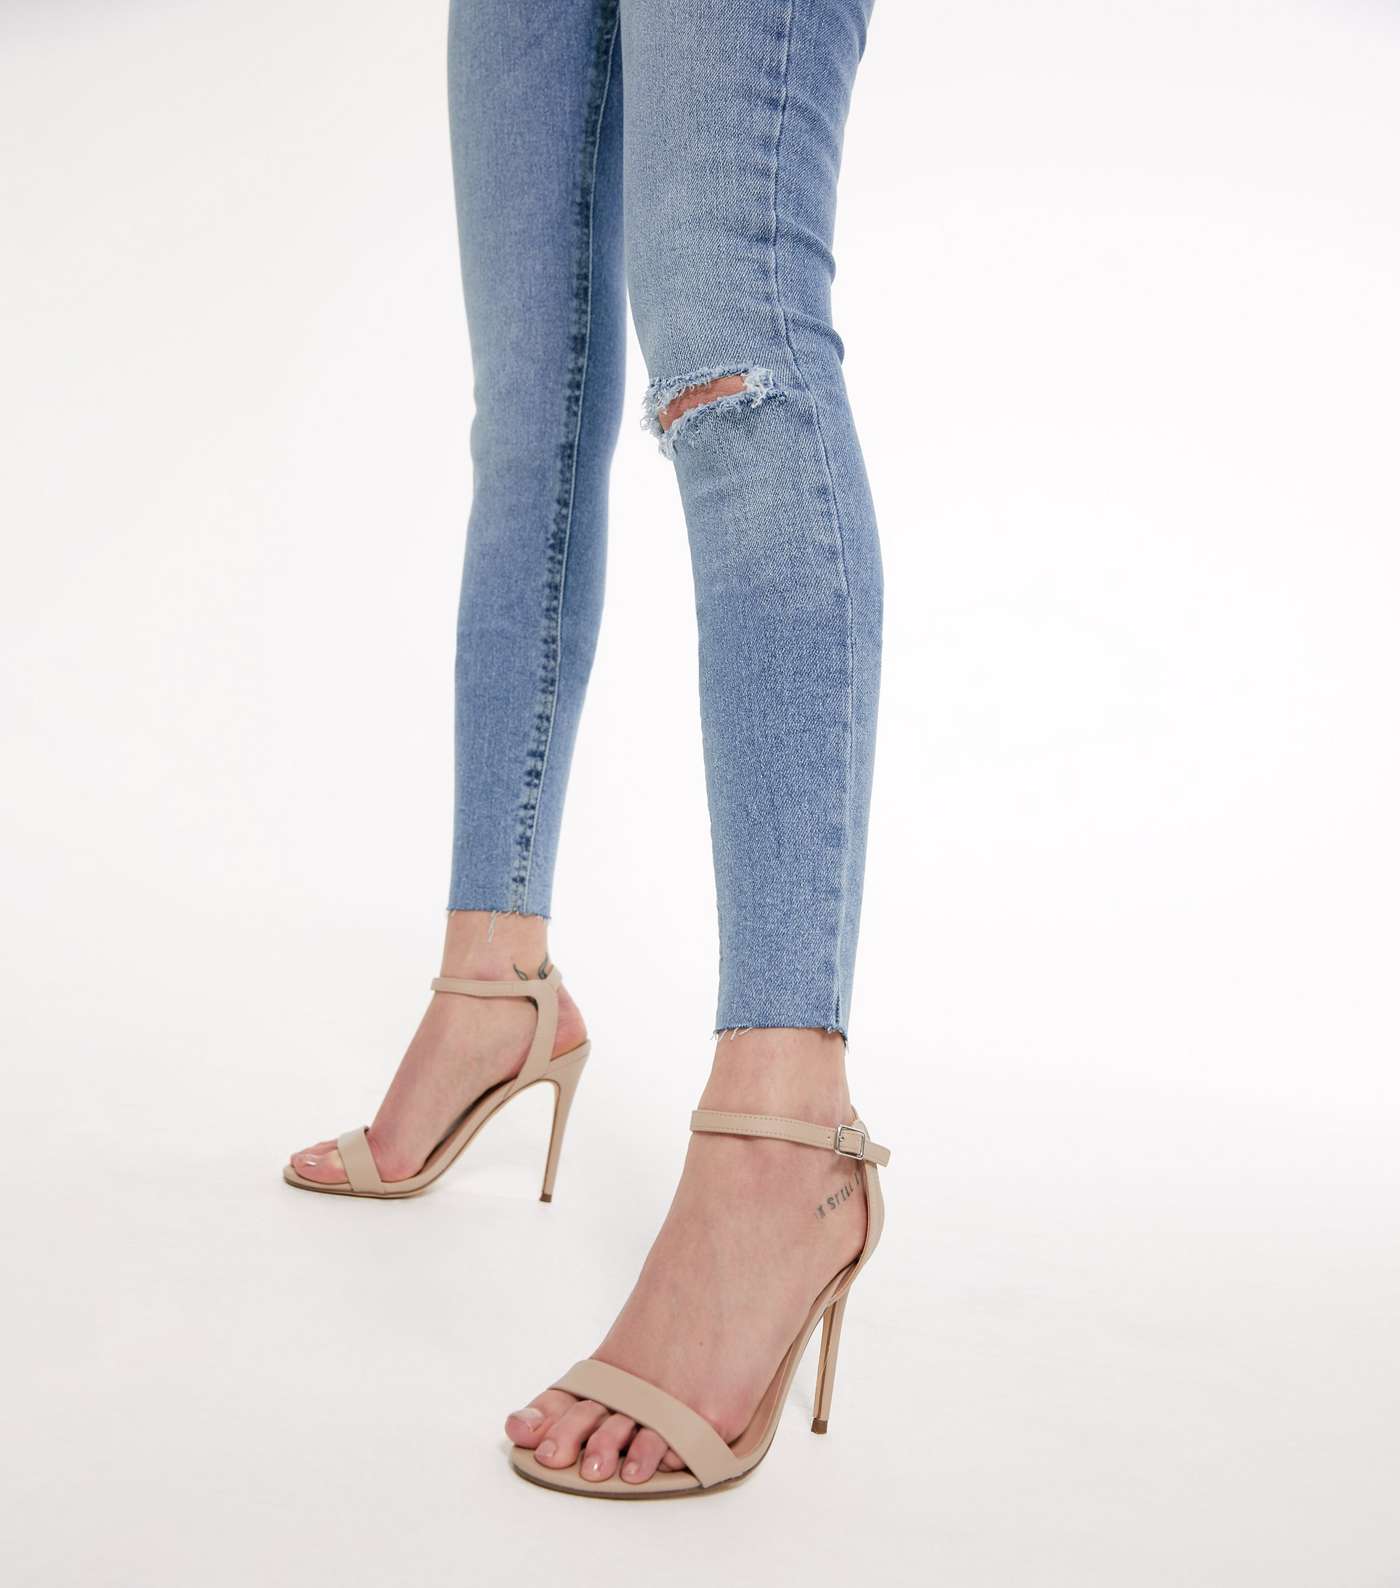 Tall Blue Ripped High Waist Hallie Super Skinny Jeans Image 4